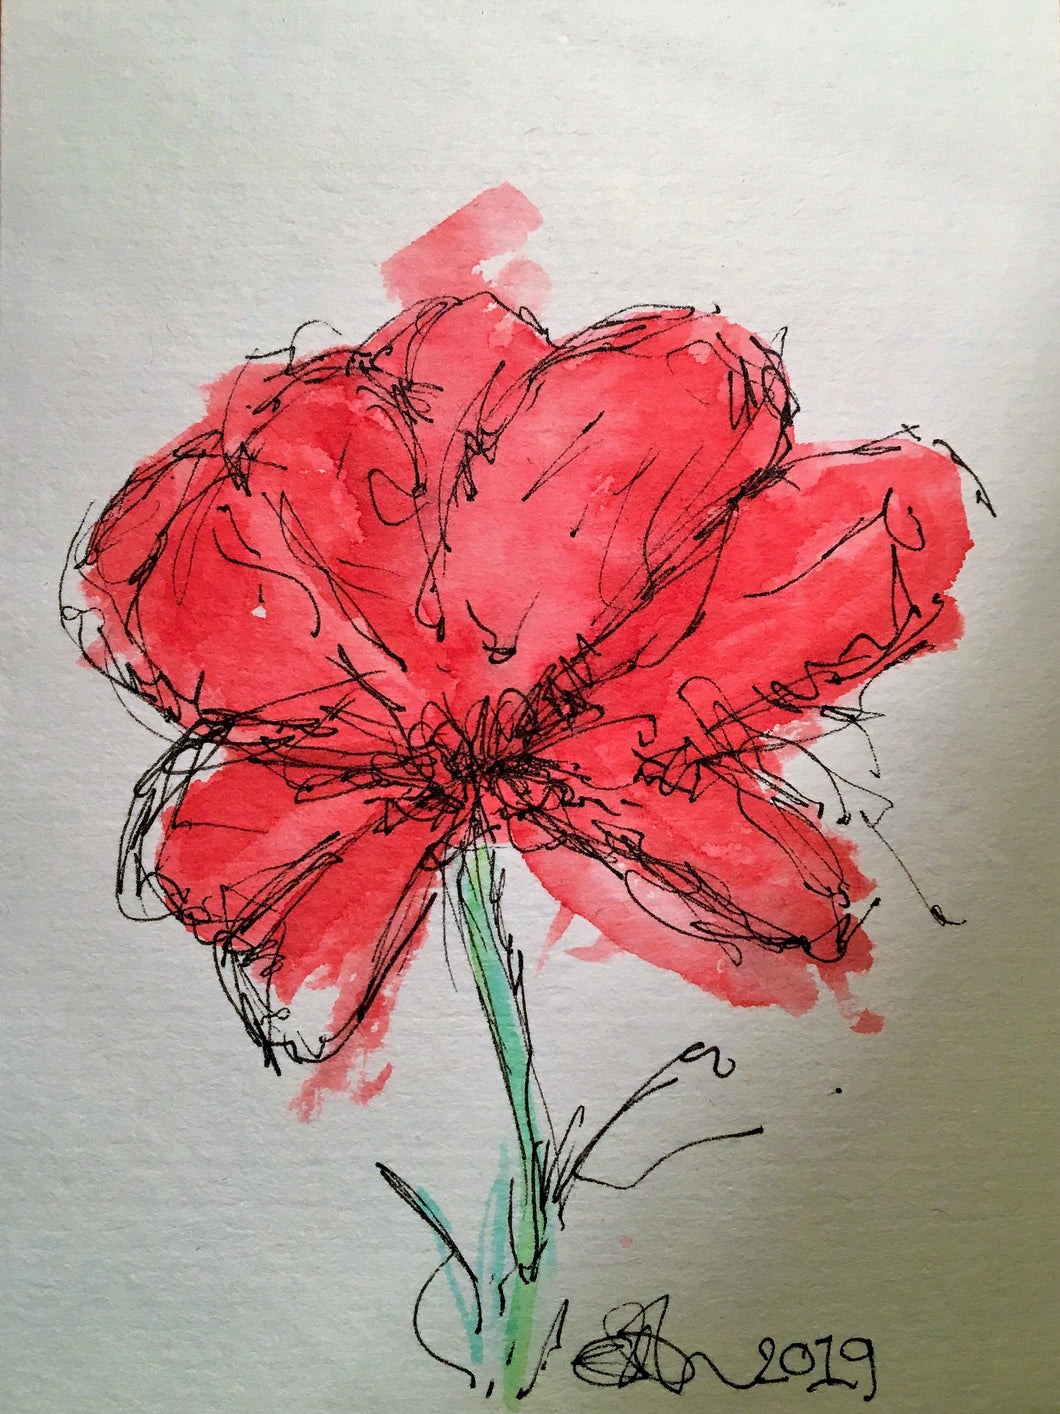 Handpainted Watercolour Greeting Card - Abstract Red Flower - eDgE dEsiGn London